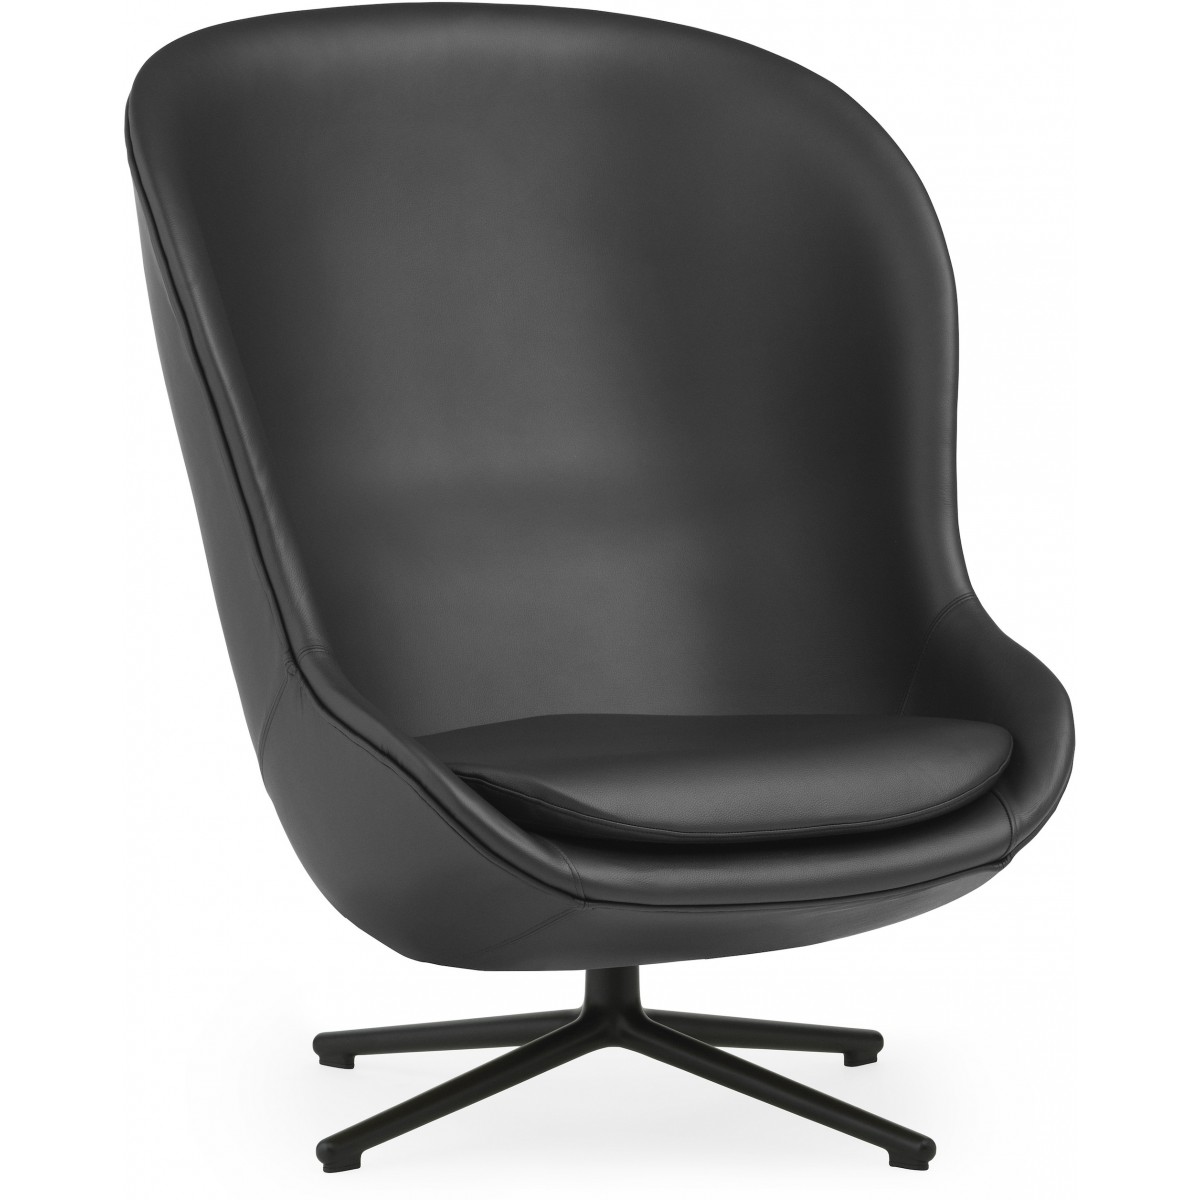 Ultra Leather 41599 / powder coated aluminium - Hyg low lounge chair